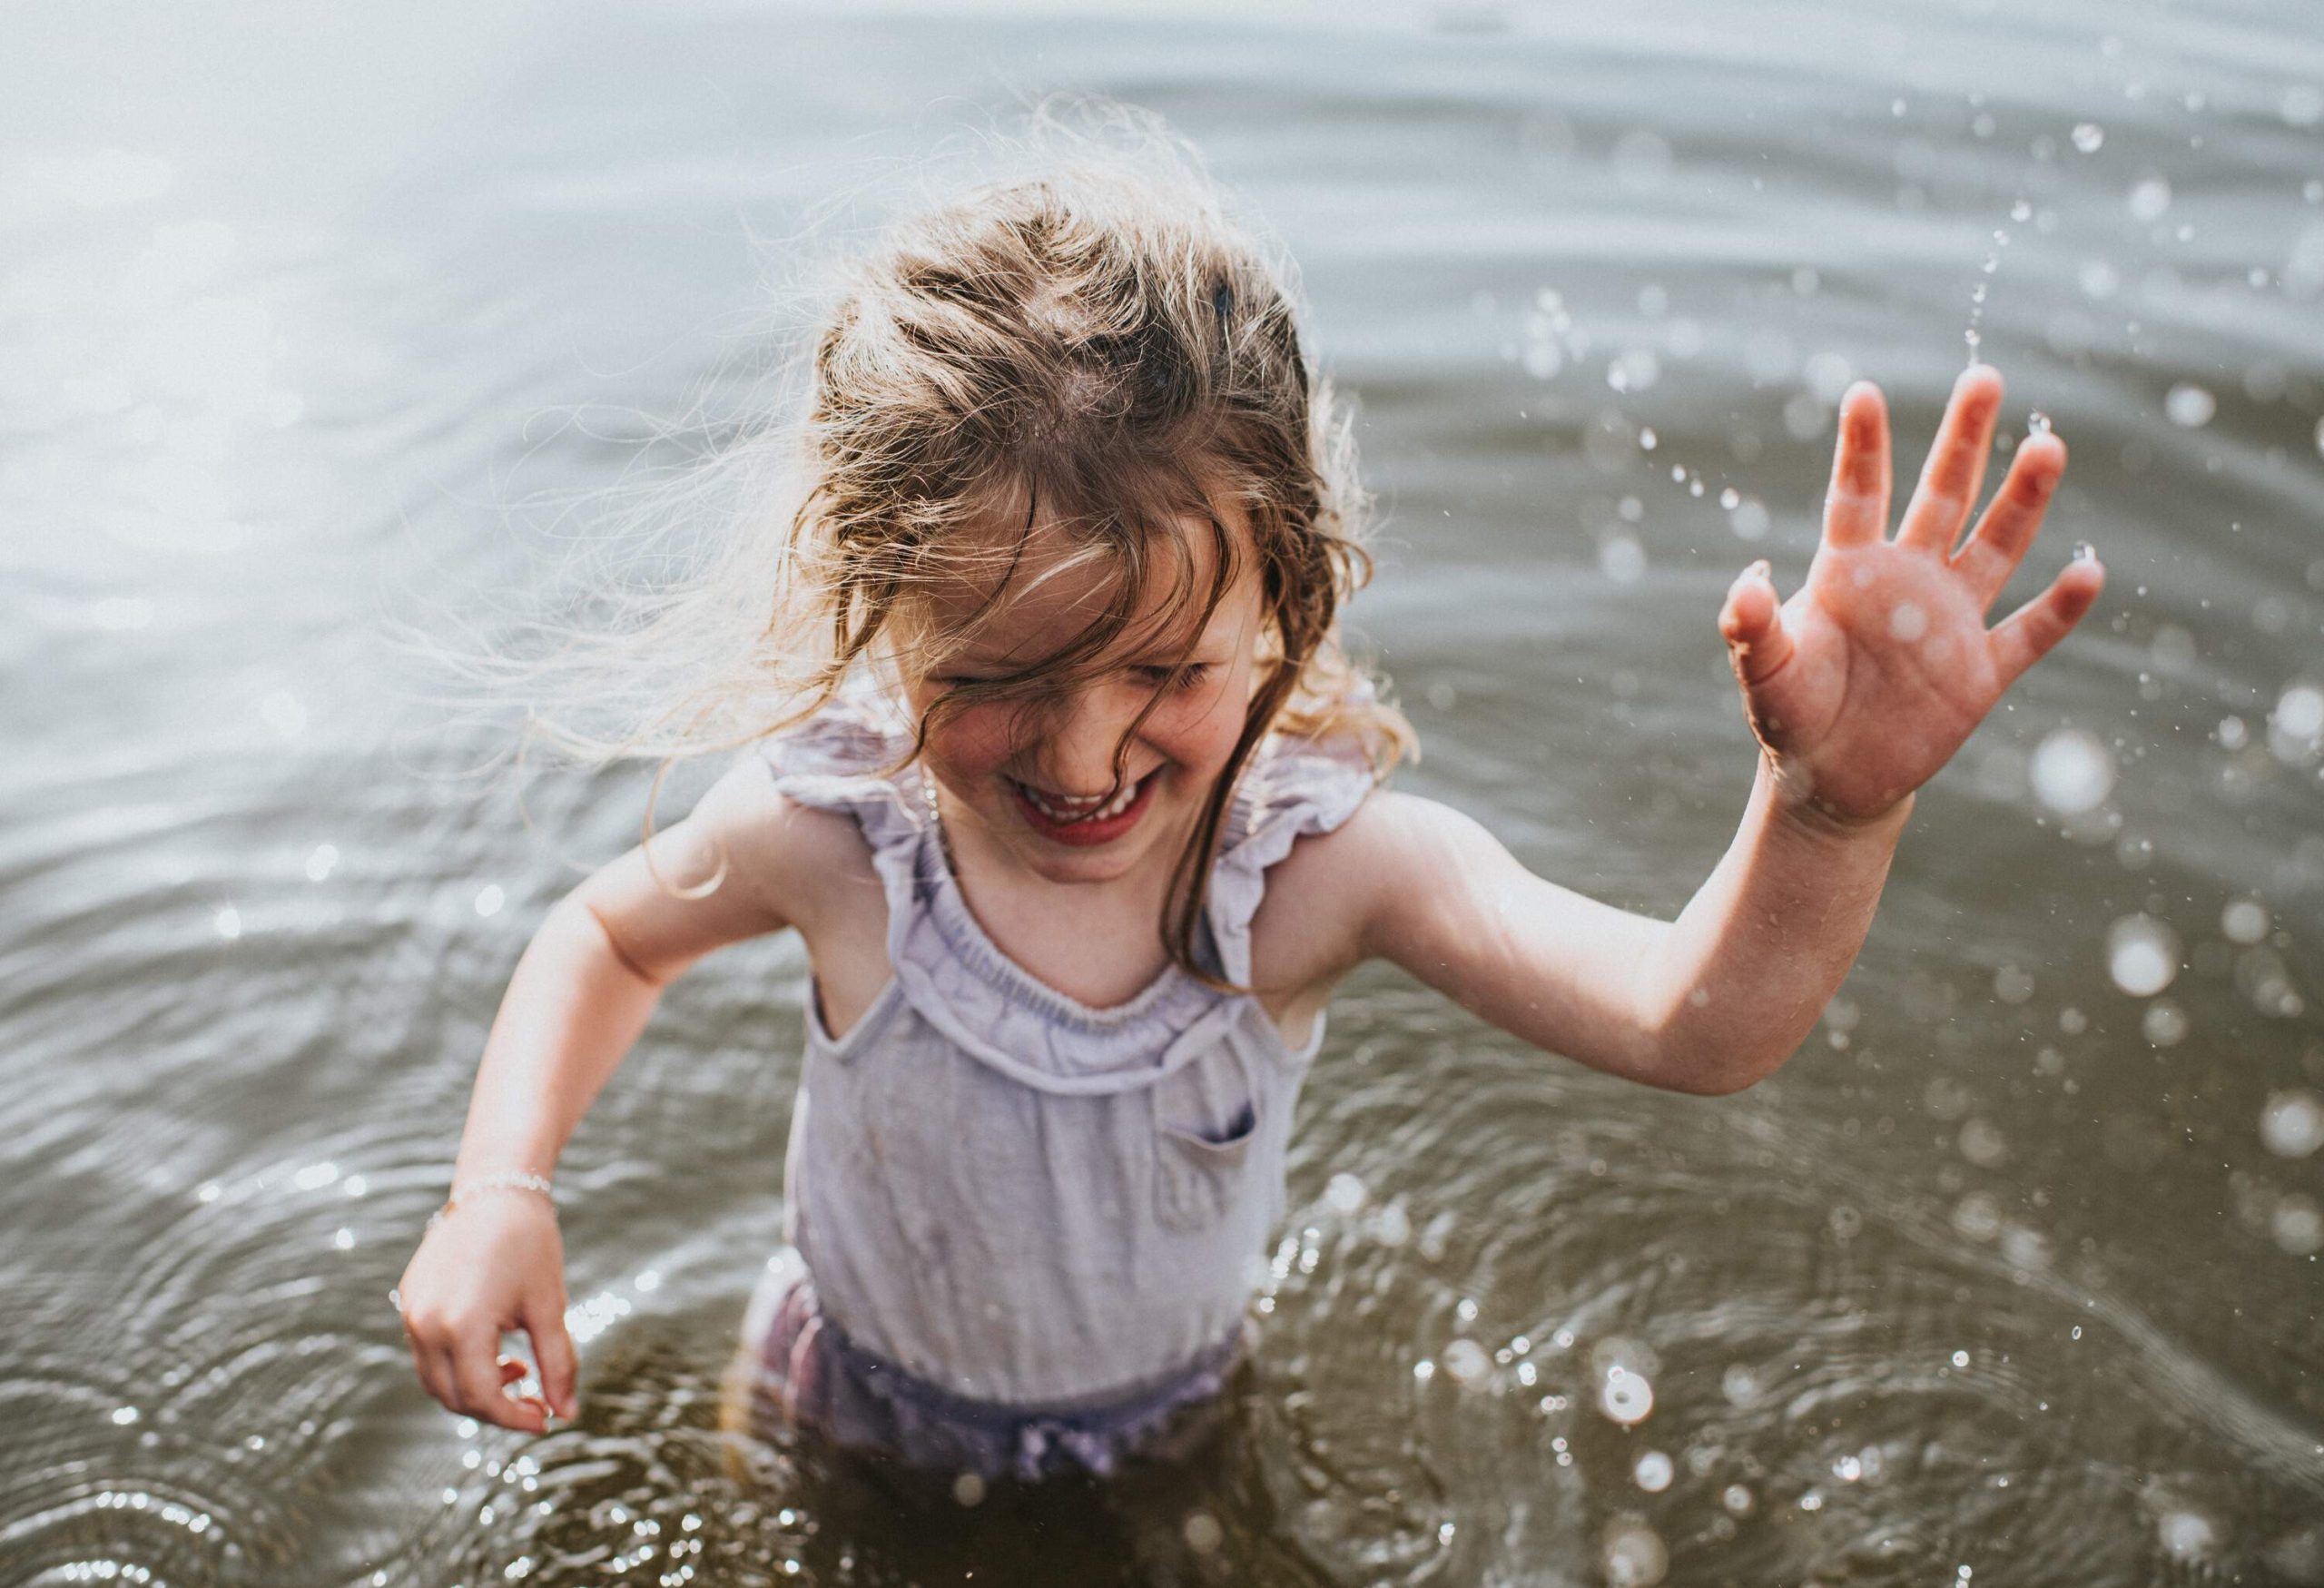 A little girl splashing around as she plays in the water.